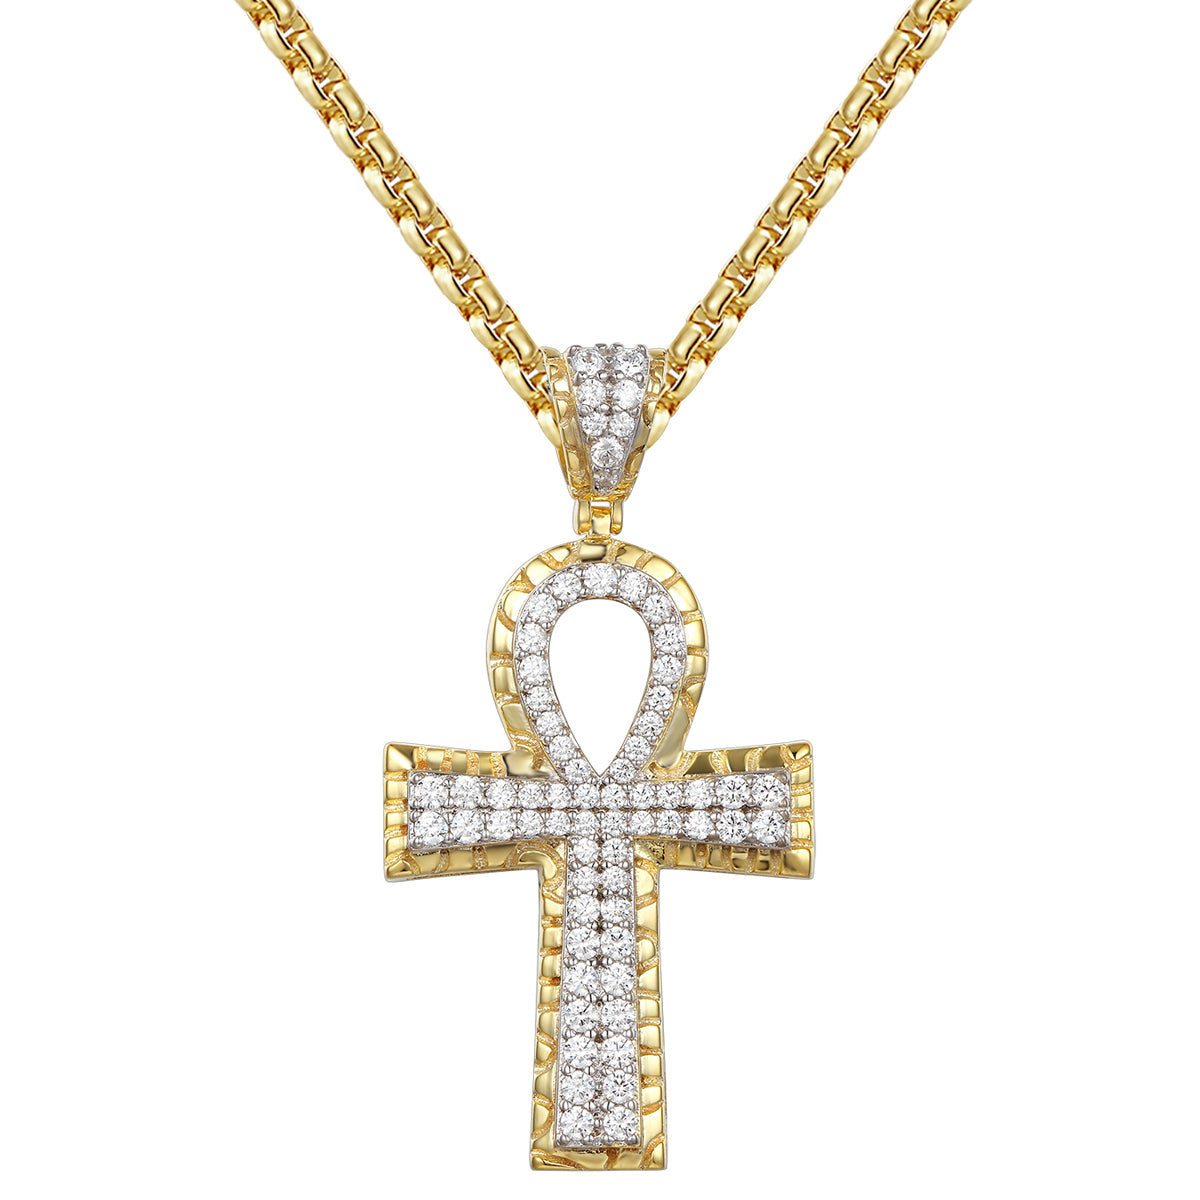 Sterling Silver Nugget Design Ankh Cross Pendant Chain